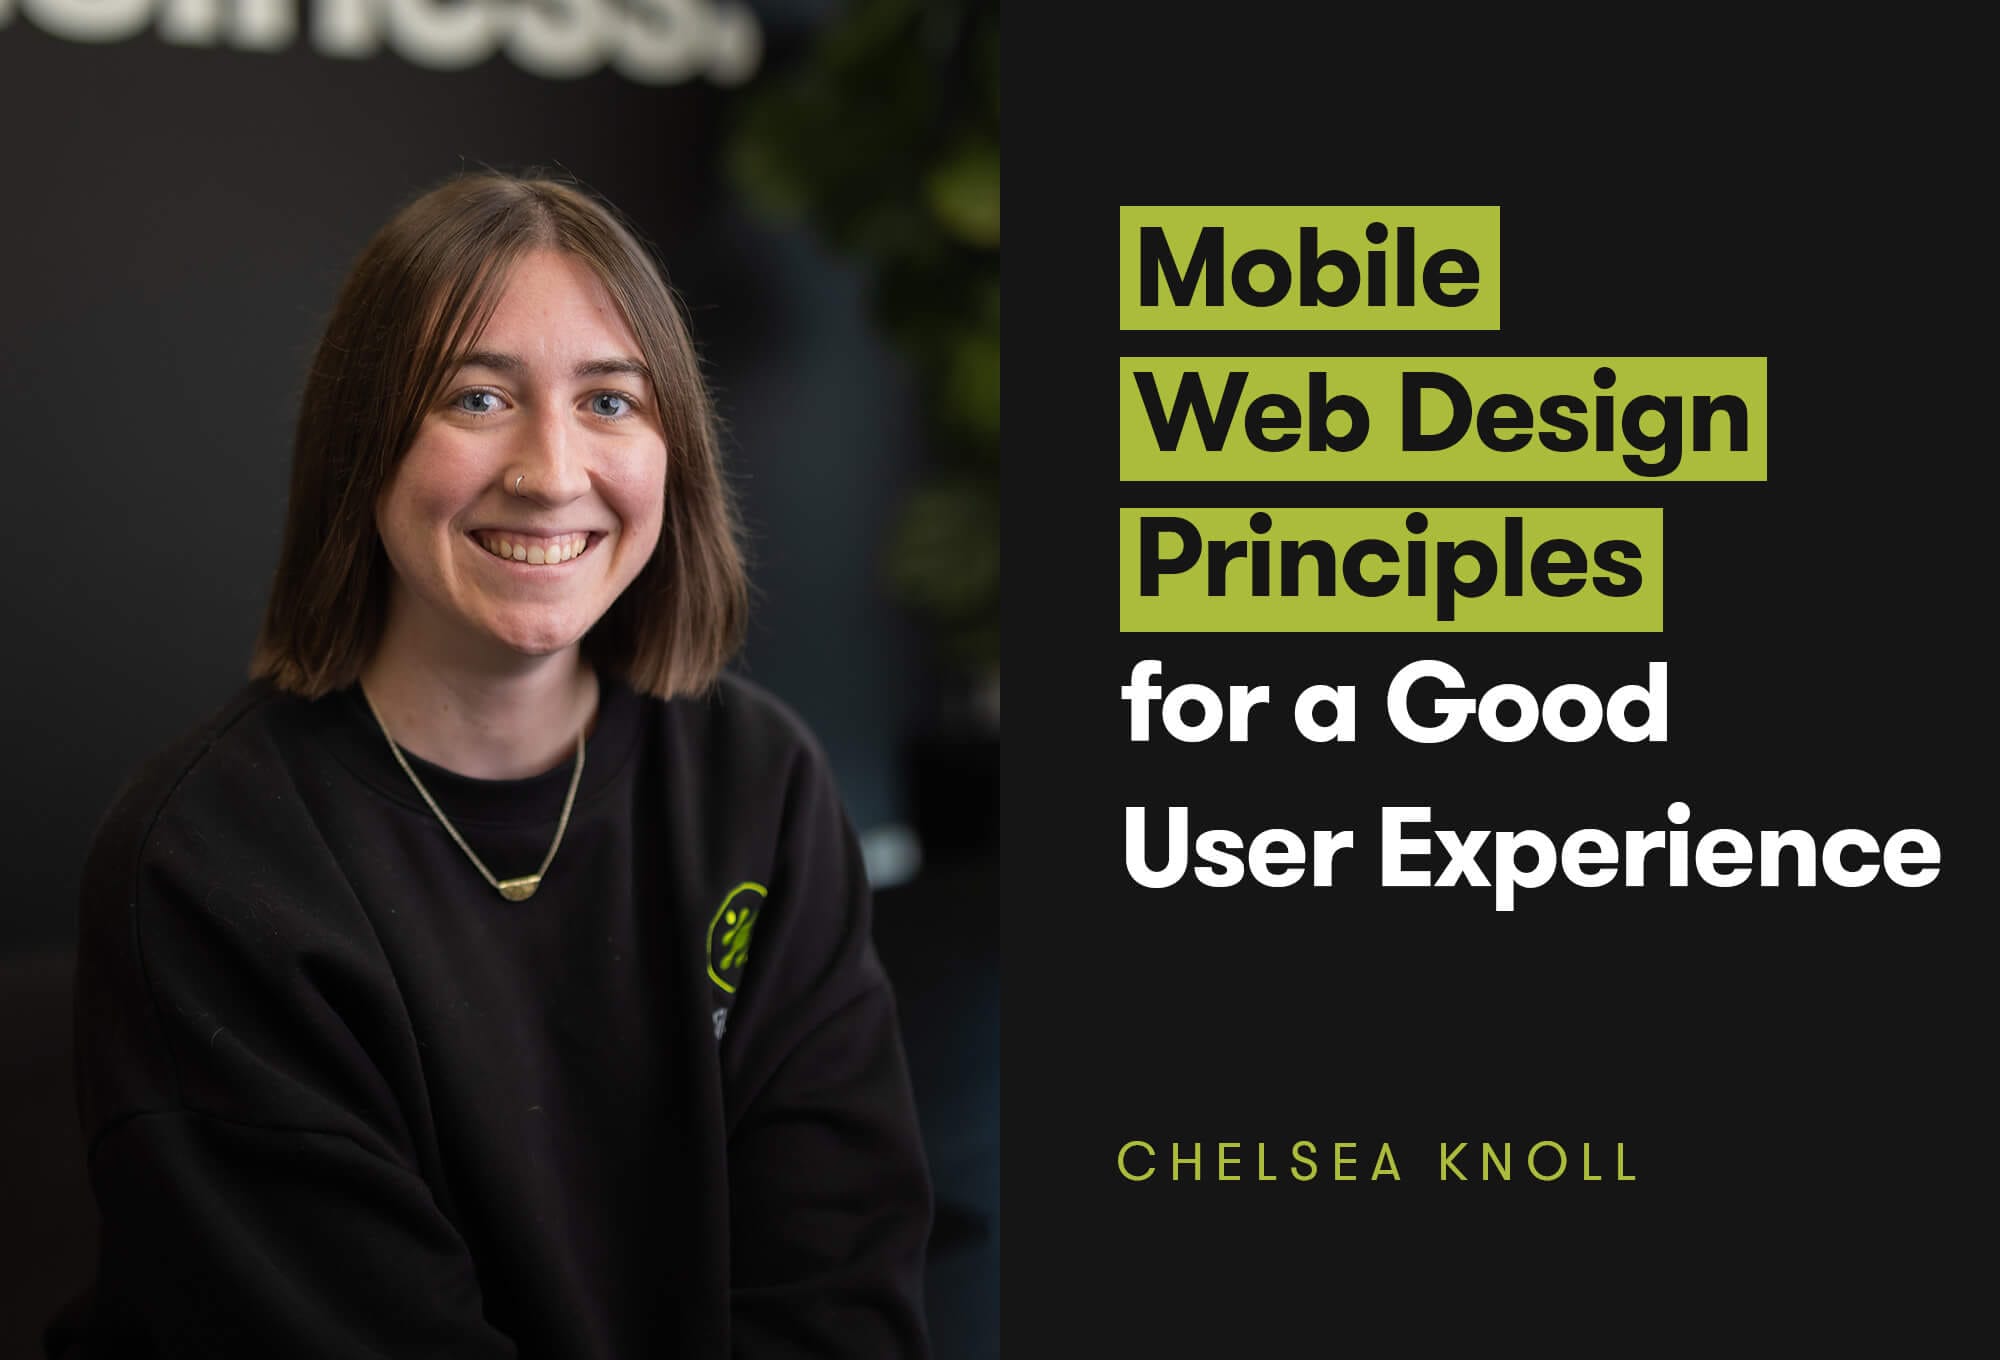 Mobile Web Design Principles for a Good User Experience